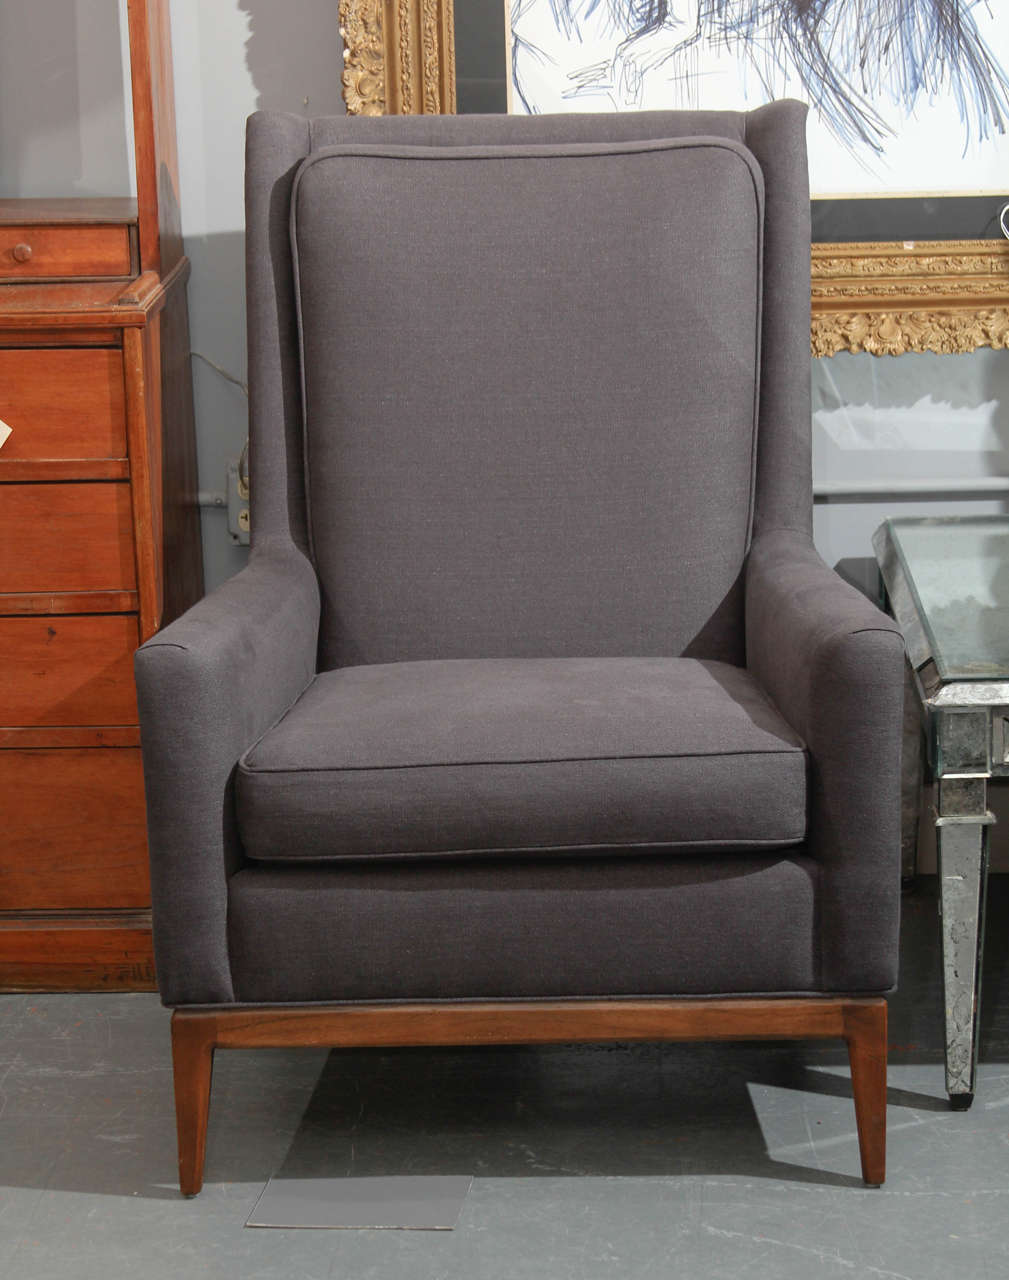 Handsome, very comfortable armchair reupholstered in upholstery weight charcoal grey linen.